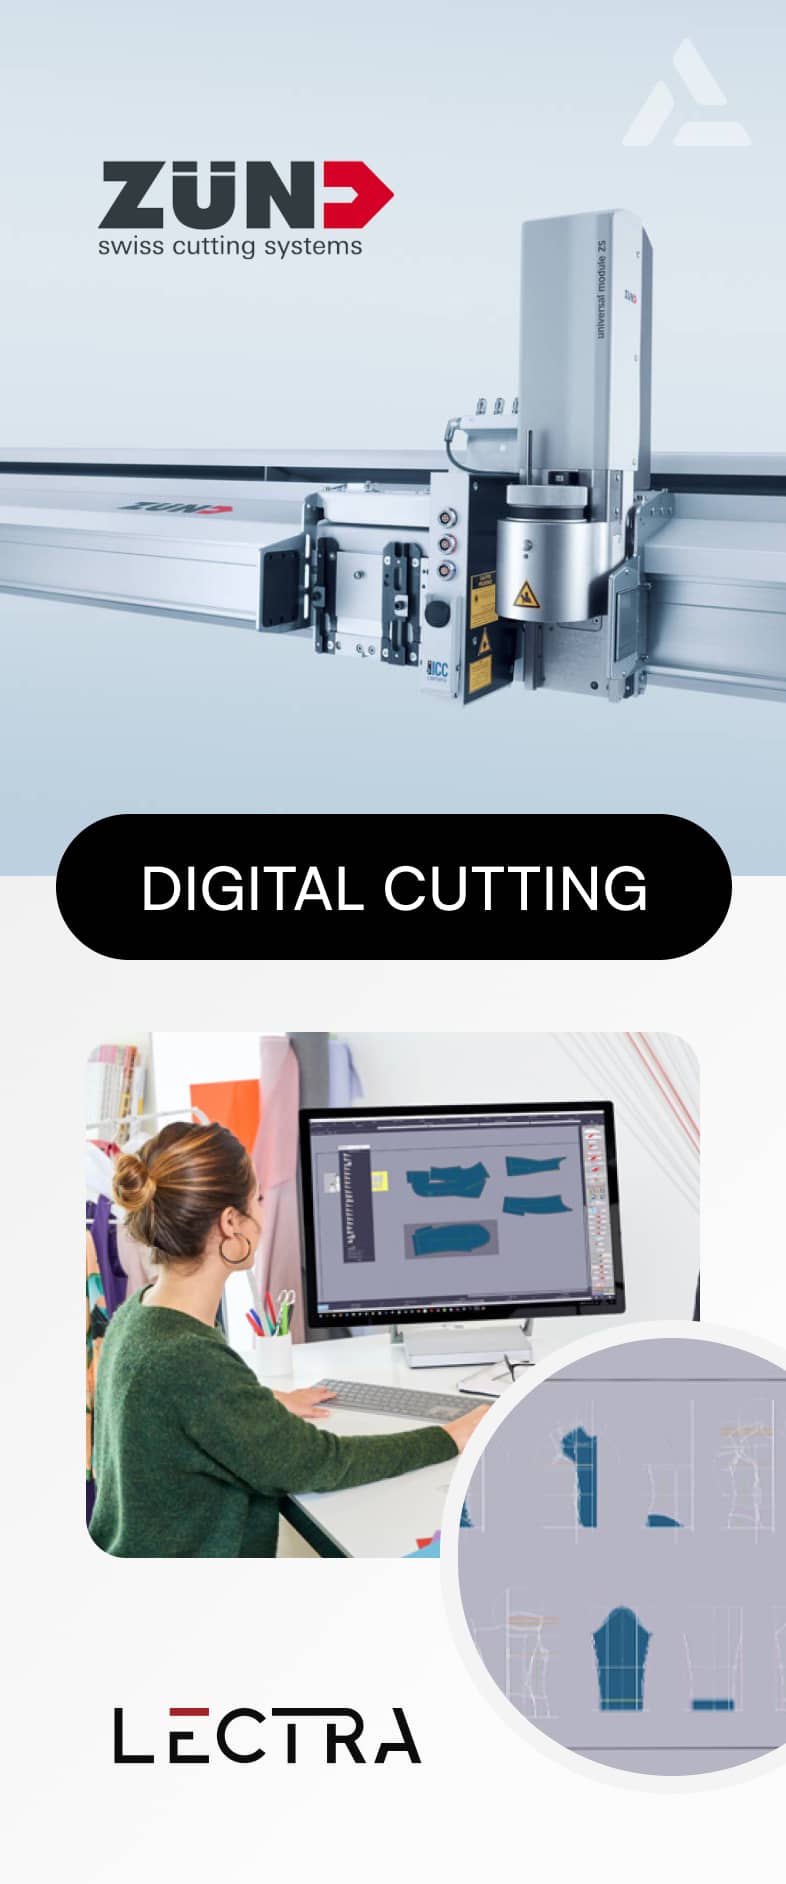 Top: logo of zund, swiss cutting systems above a large industrial cutting machine tailored for the on-demand fashion industry. Bottom: woman using computer for digital design in fashion tech, highlighted